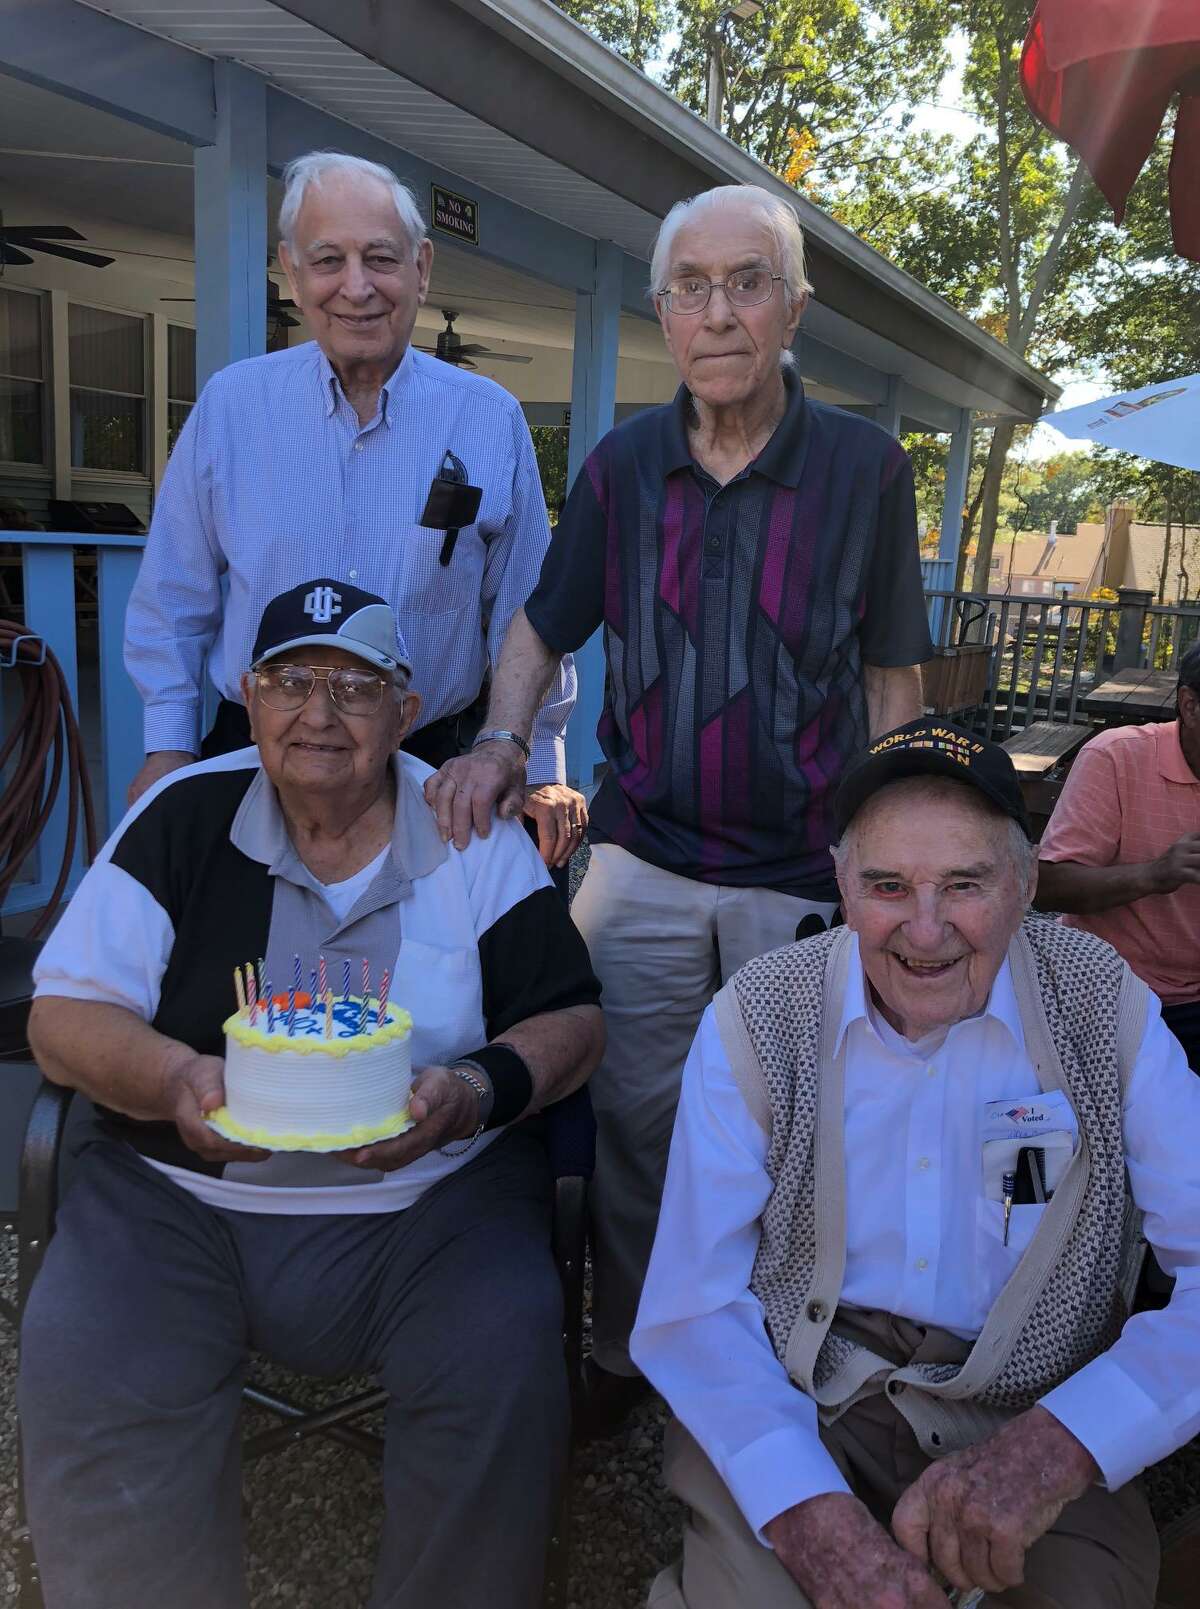 The Shelton Republican Town Committee held its annual picnic at the American Legion Post #16 on Sunday, and as part of the festivities took time to honor (rear, from left) Joseph DeFilippo, Geno Bonitanibus, (front, from left) Steve Chuckta, Sr., and Roy Glover.